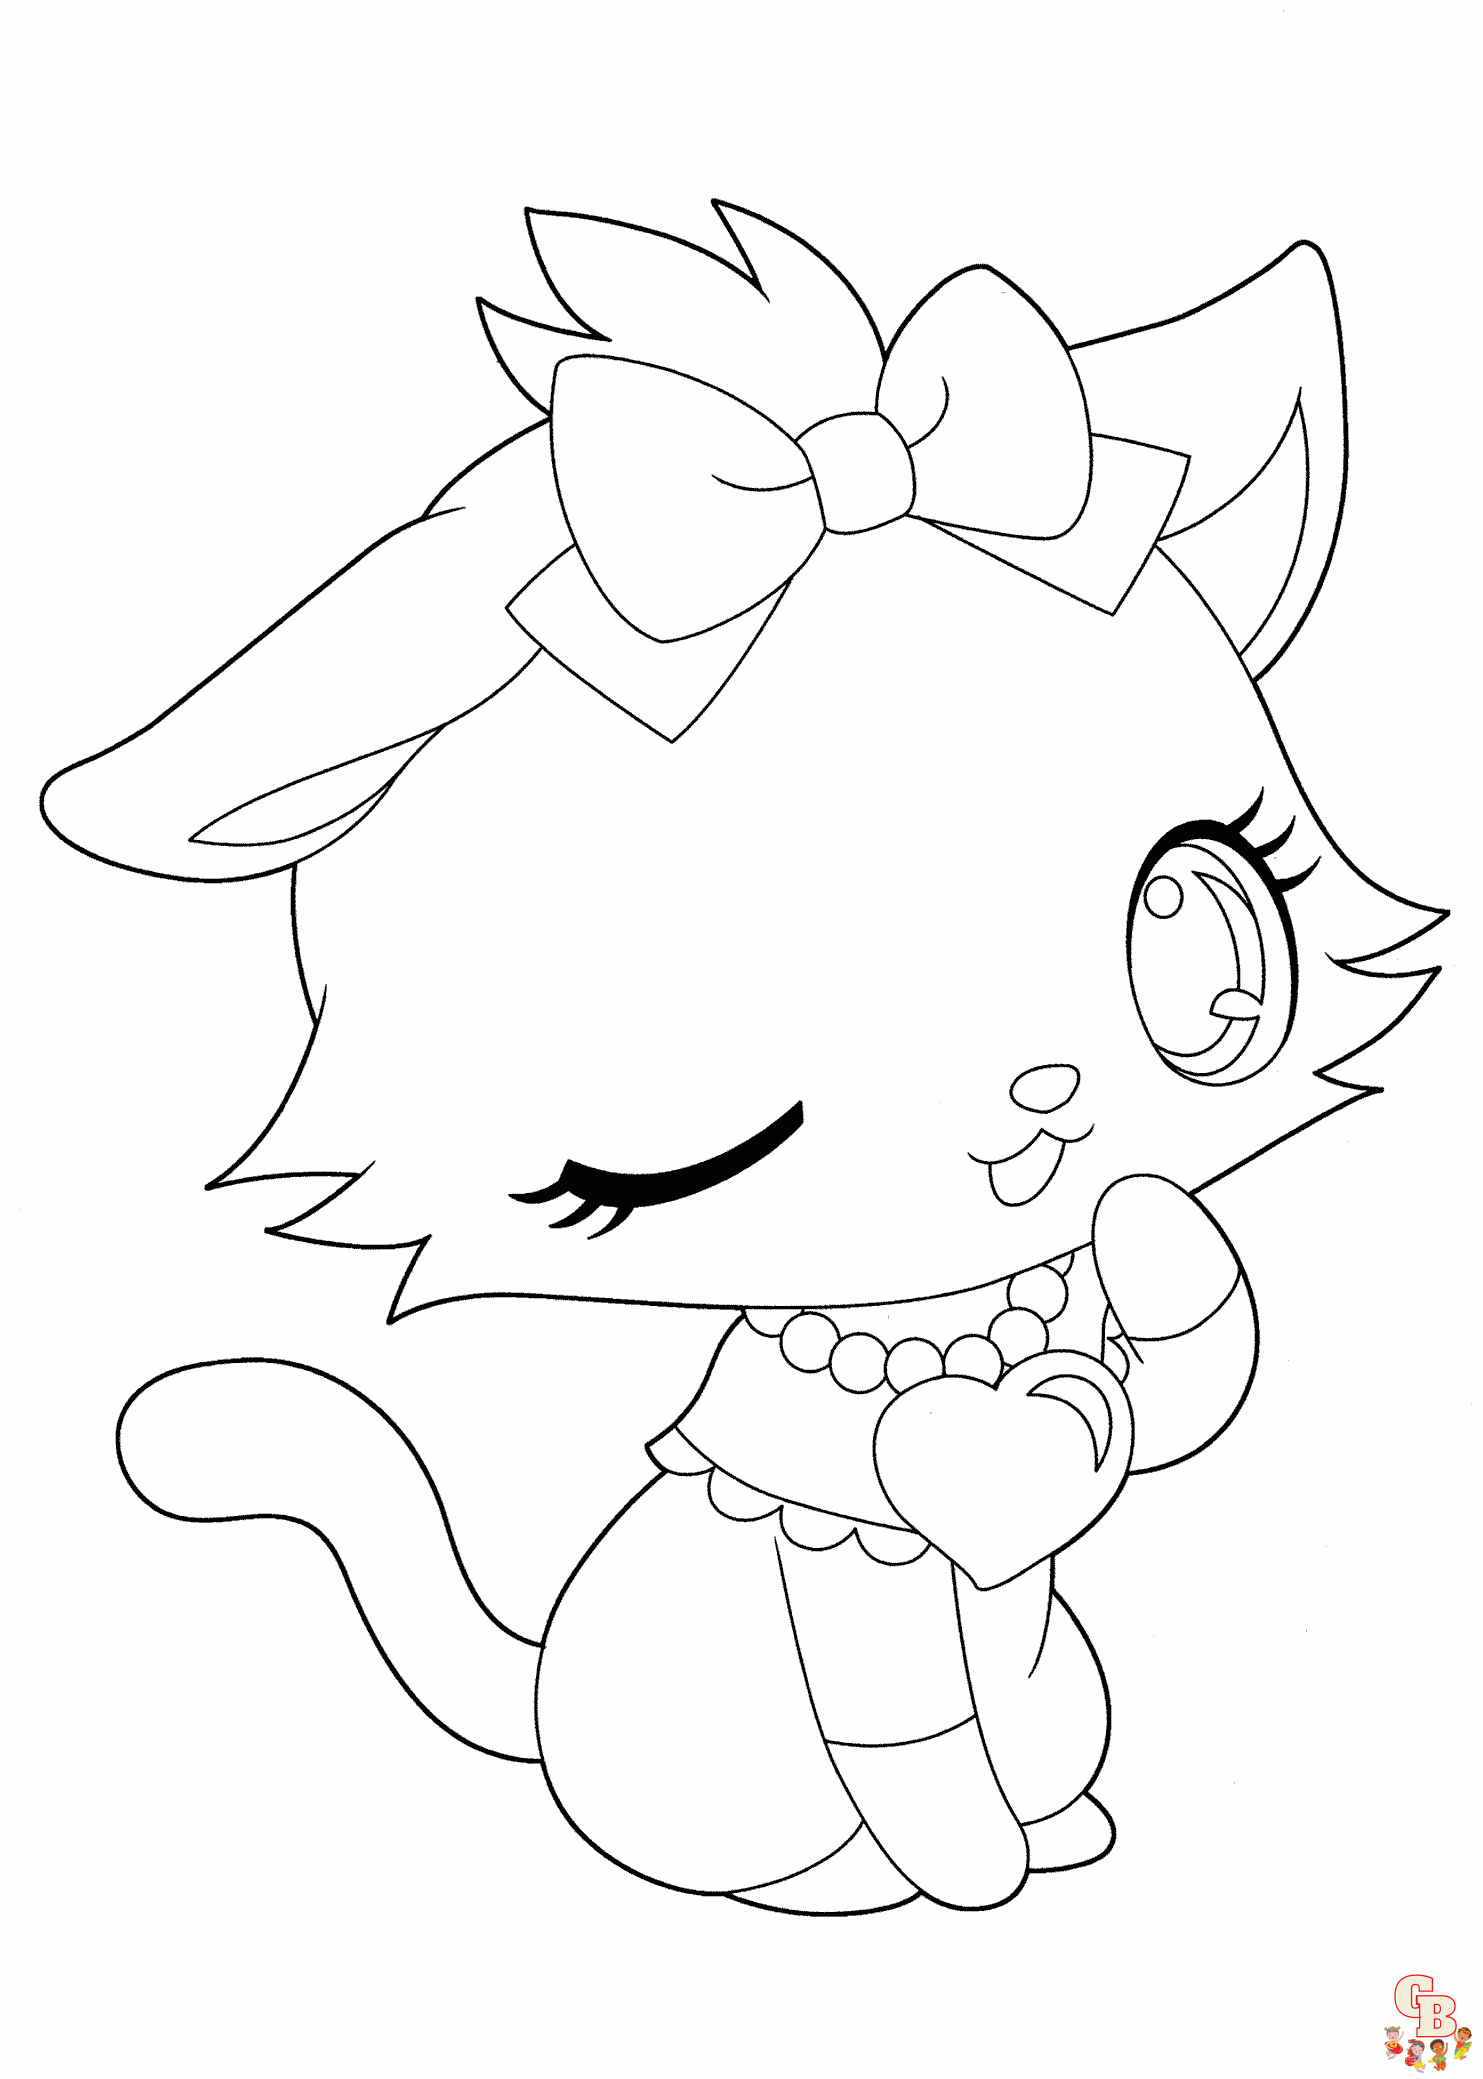 Premium Vector | Coloring page printable cute cat unicorn or anime cat  coloring pages for children kids and adults